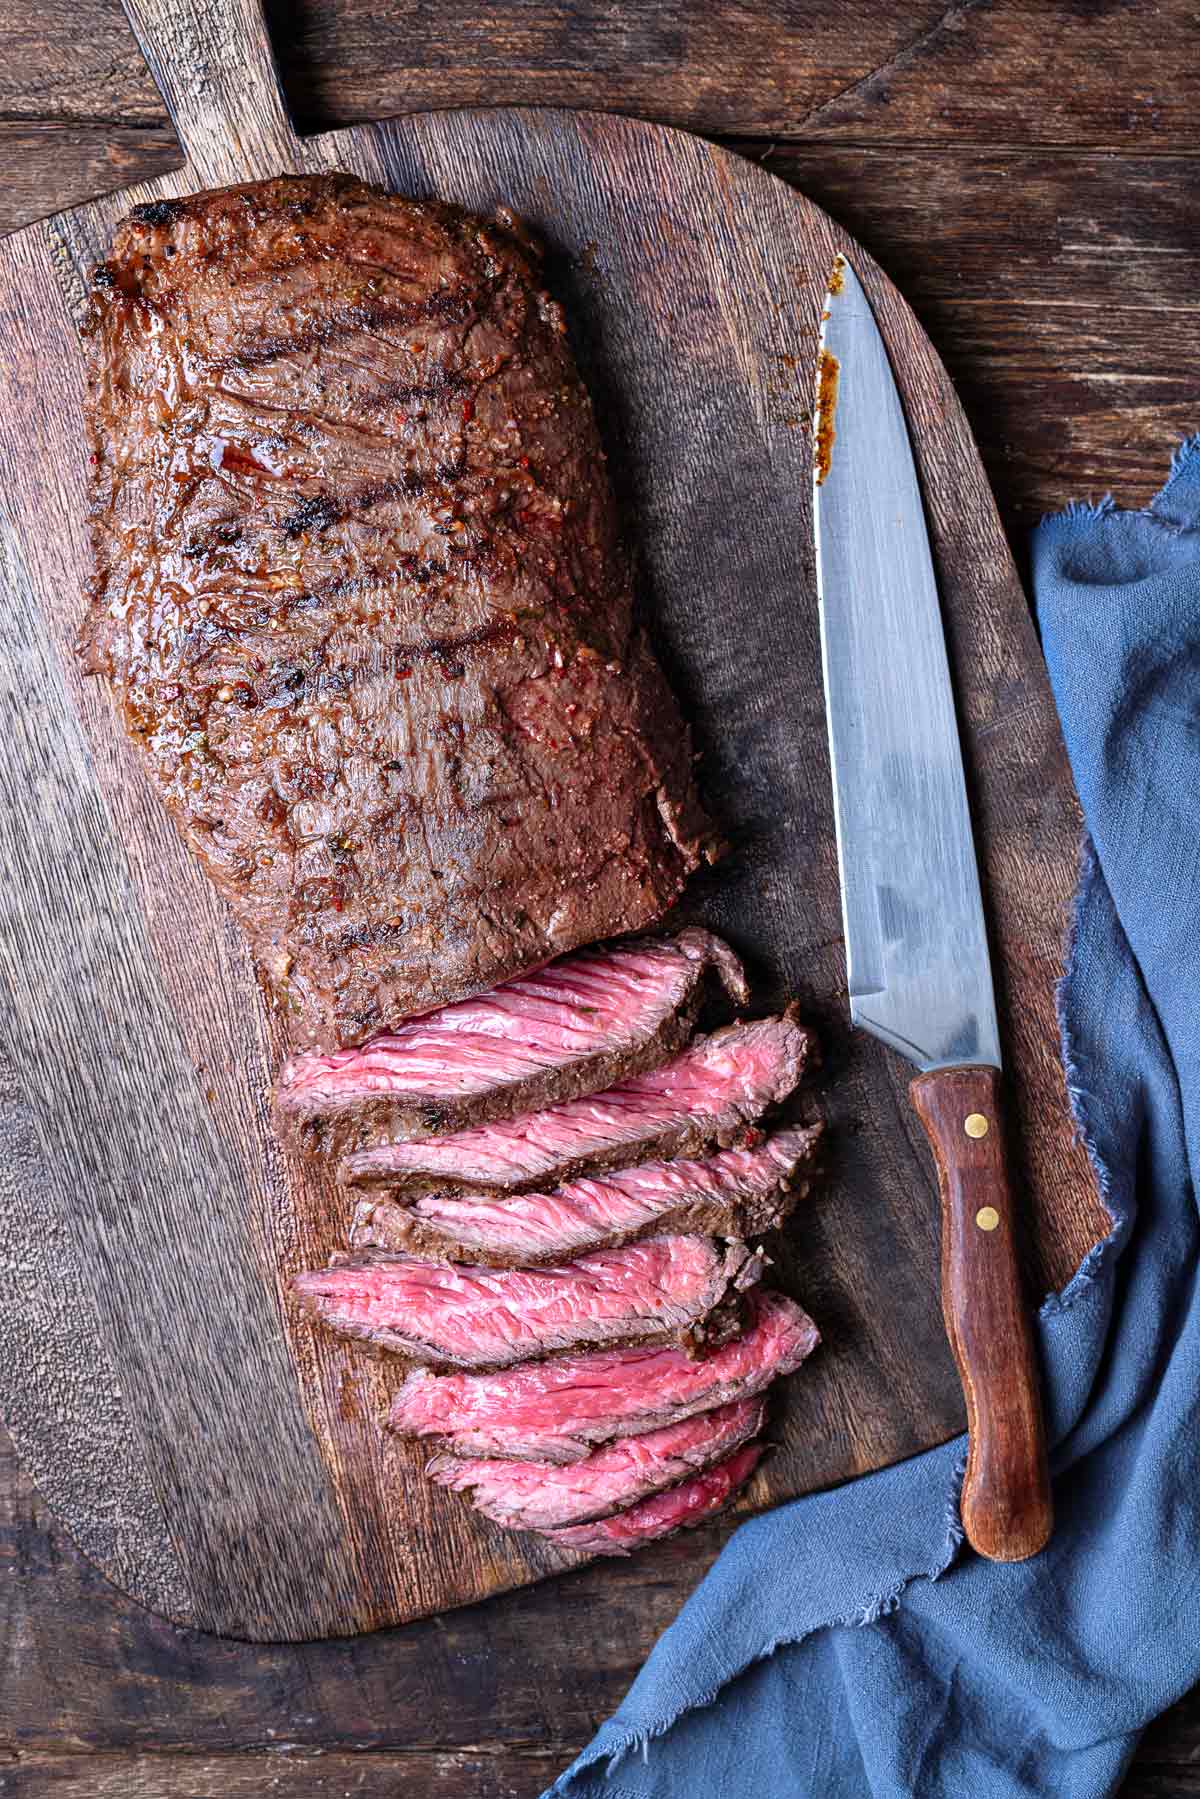 a half-sliced grilled skirt steak on a wooden cutting board with a knife.